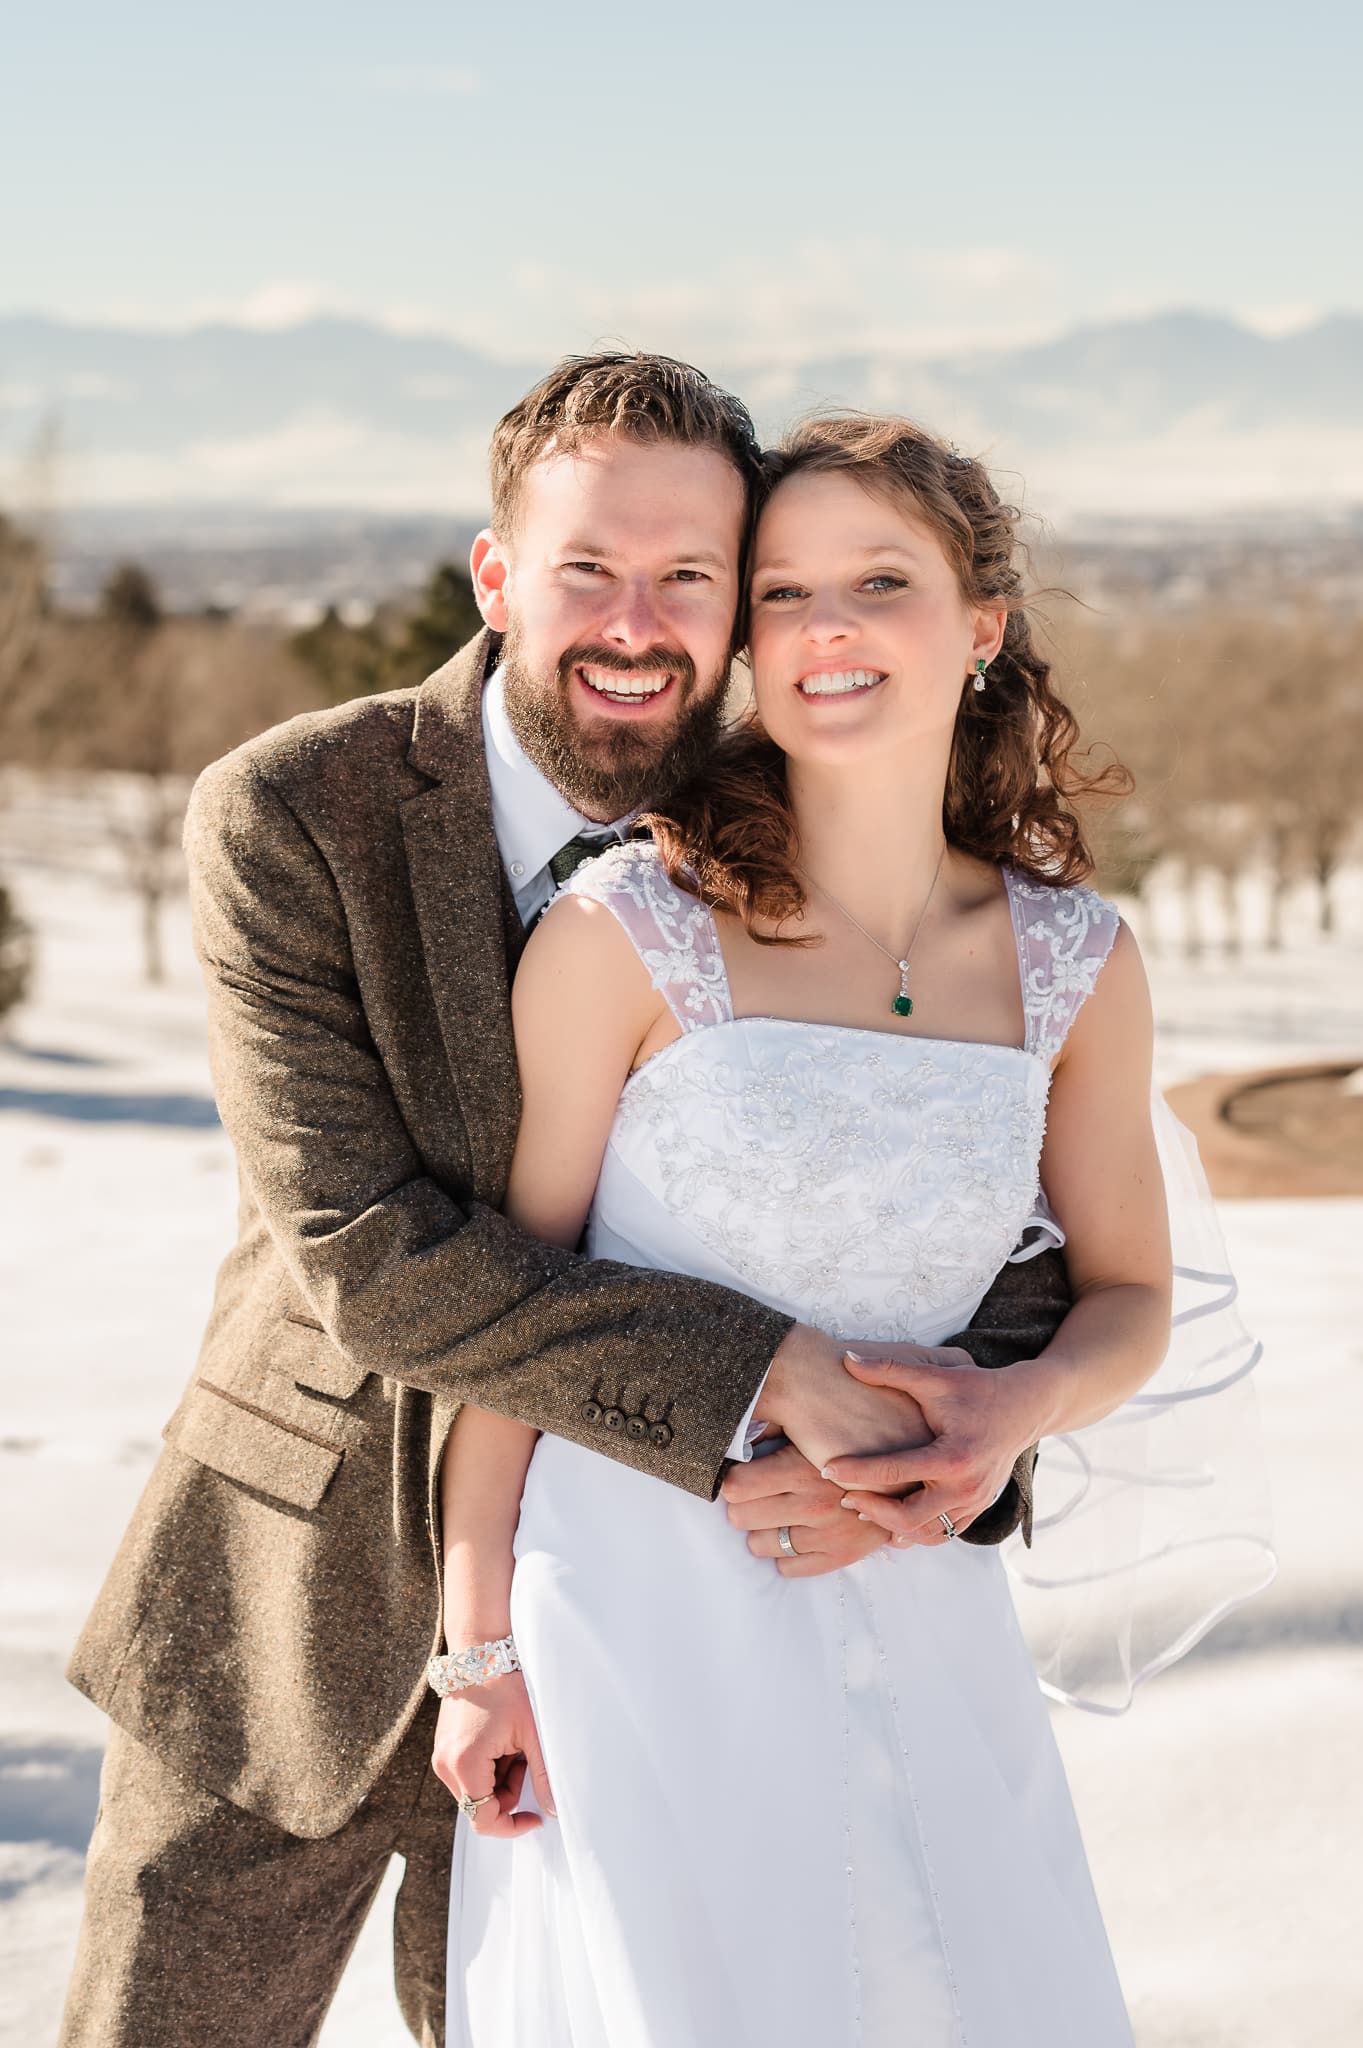 Winter wedding photo of the wedding couple with the Rocky Mountains in the background.